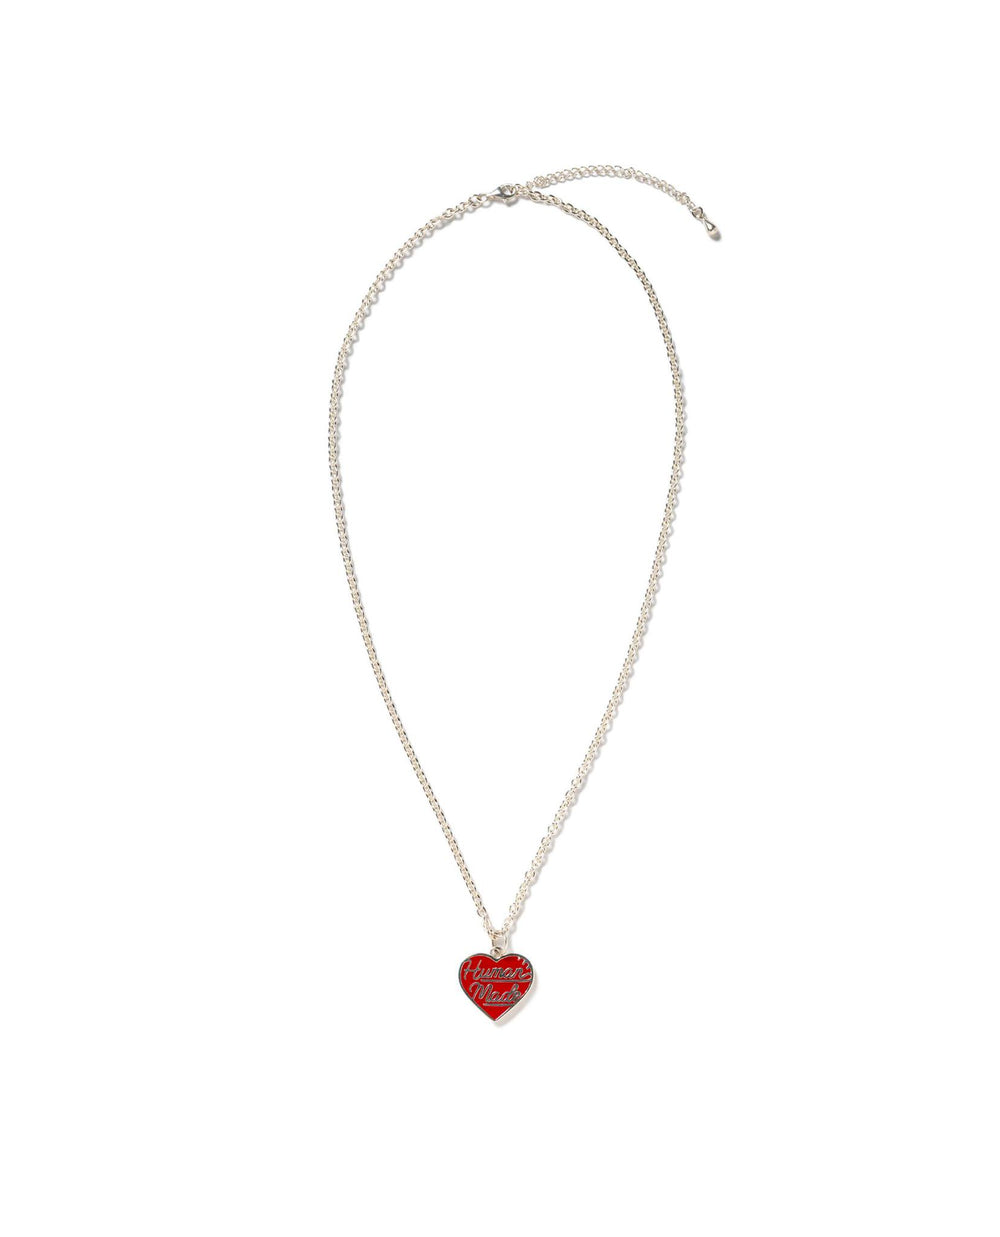 SILVER925COLORHUMAN MADE HEART SILVER NECKLACE - ネックレス